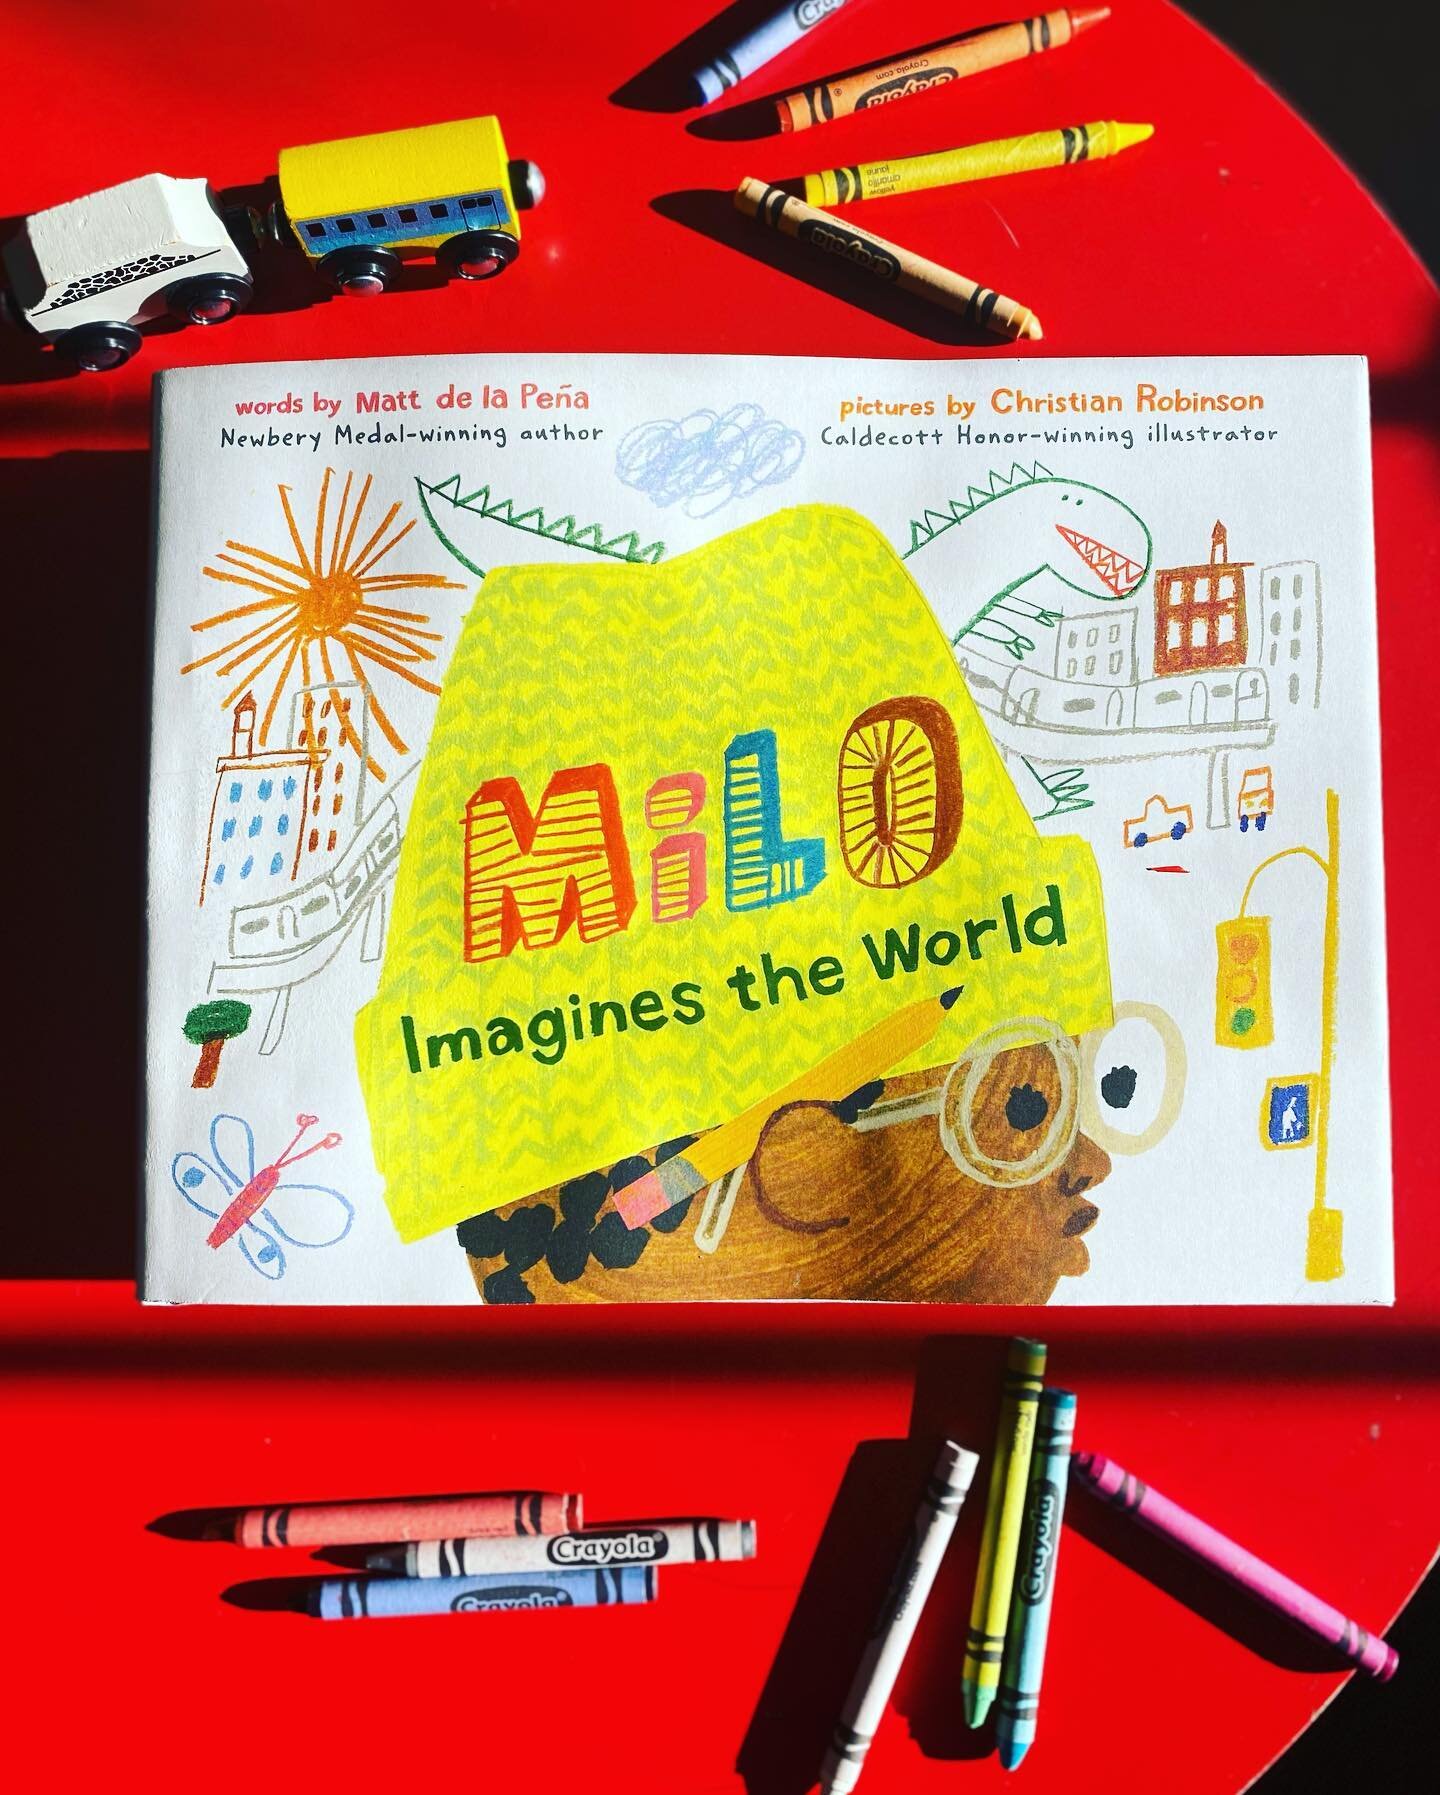 Happy Read Across America Day! In my continual effort to promote diversity in children&rsquo;s literature, today I wanted to share with you, &ldquo;Milo Imagines The World&rdquo; ...a beautiful layered story written &amp; illustrated by the same amaz